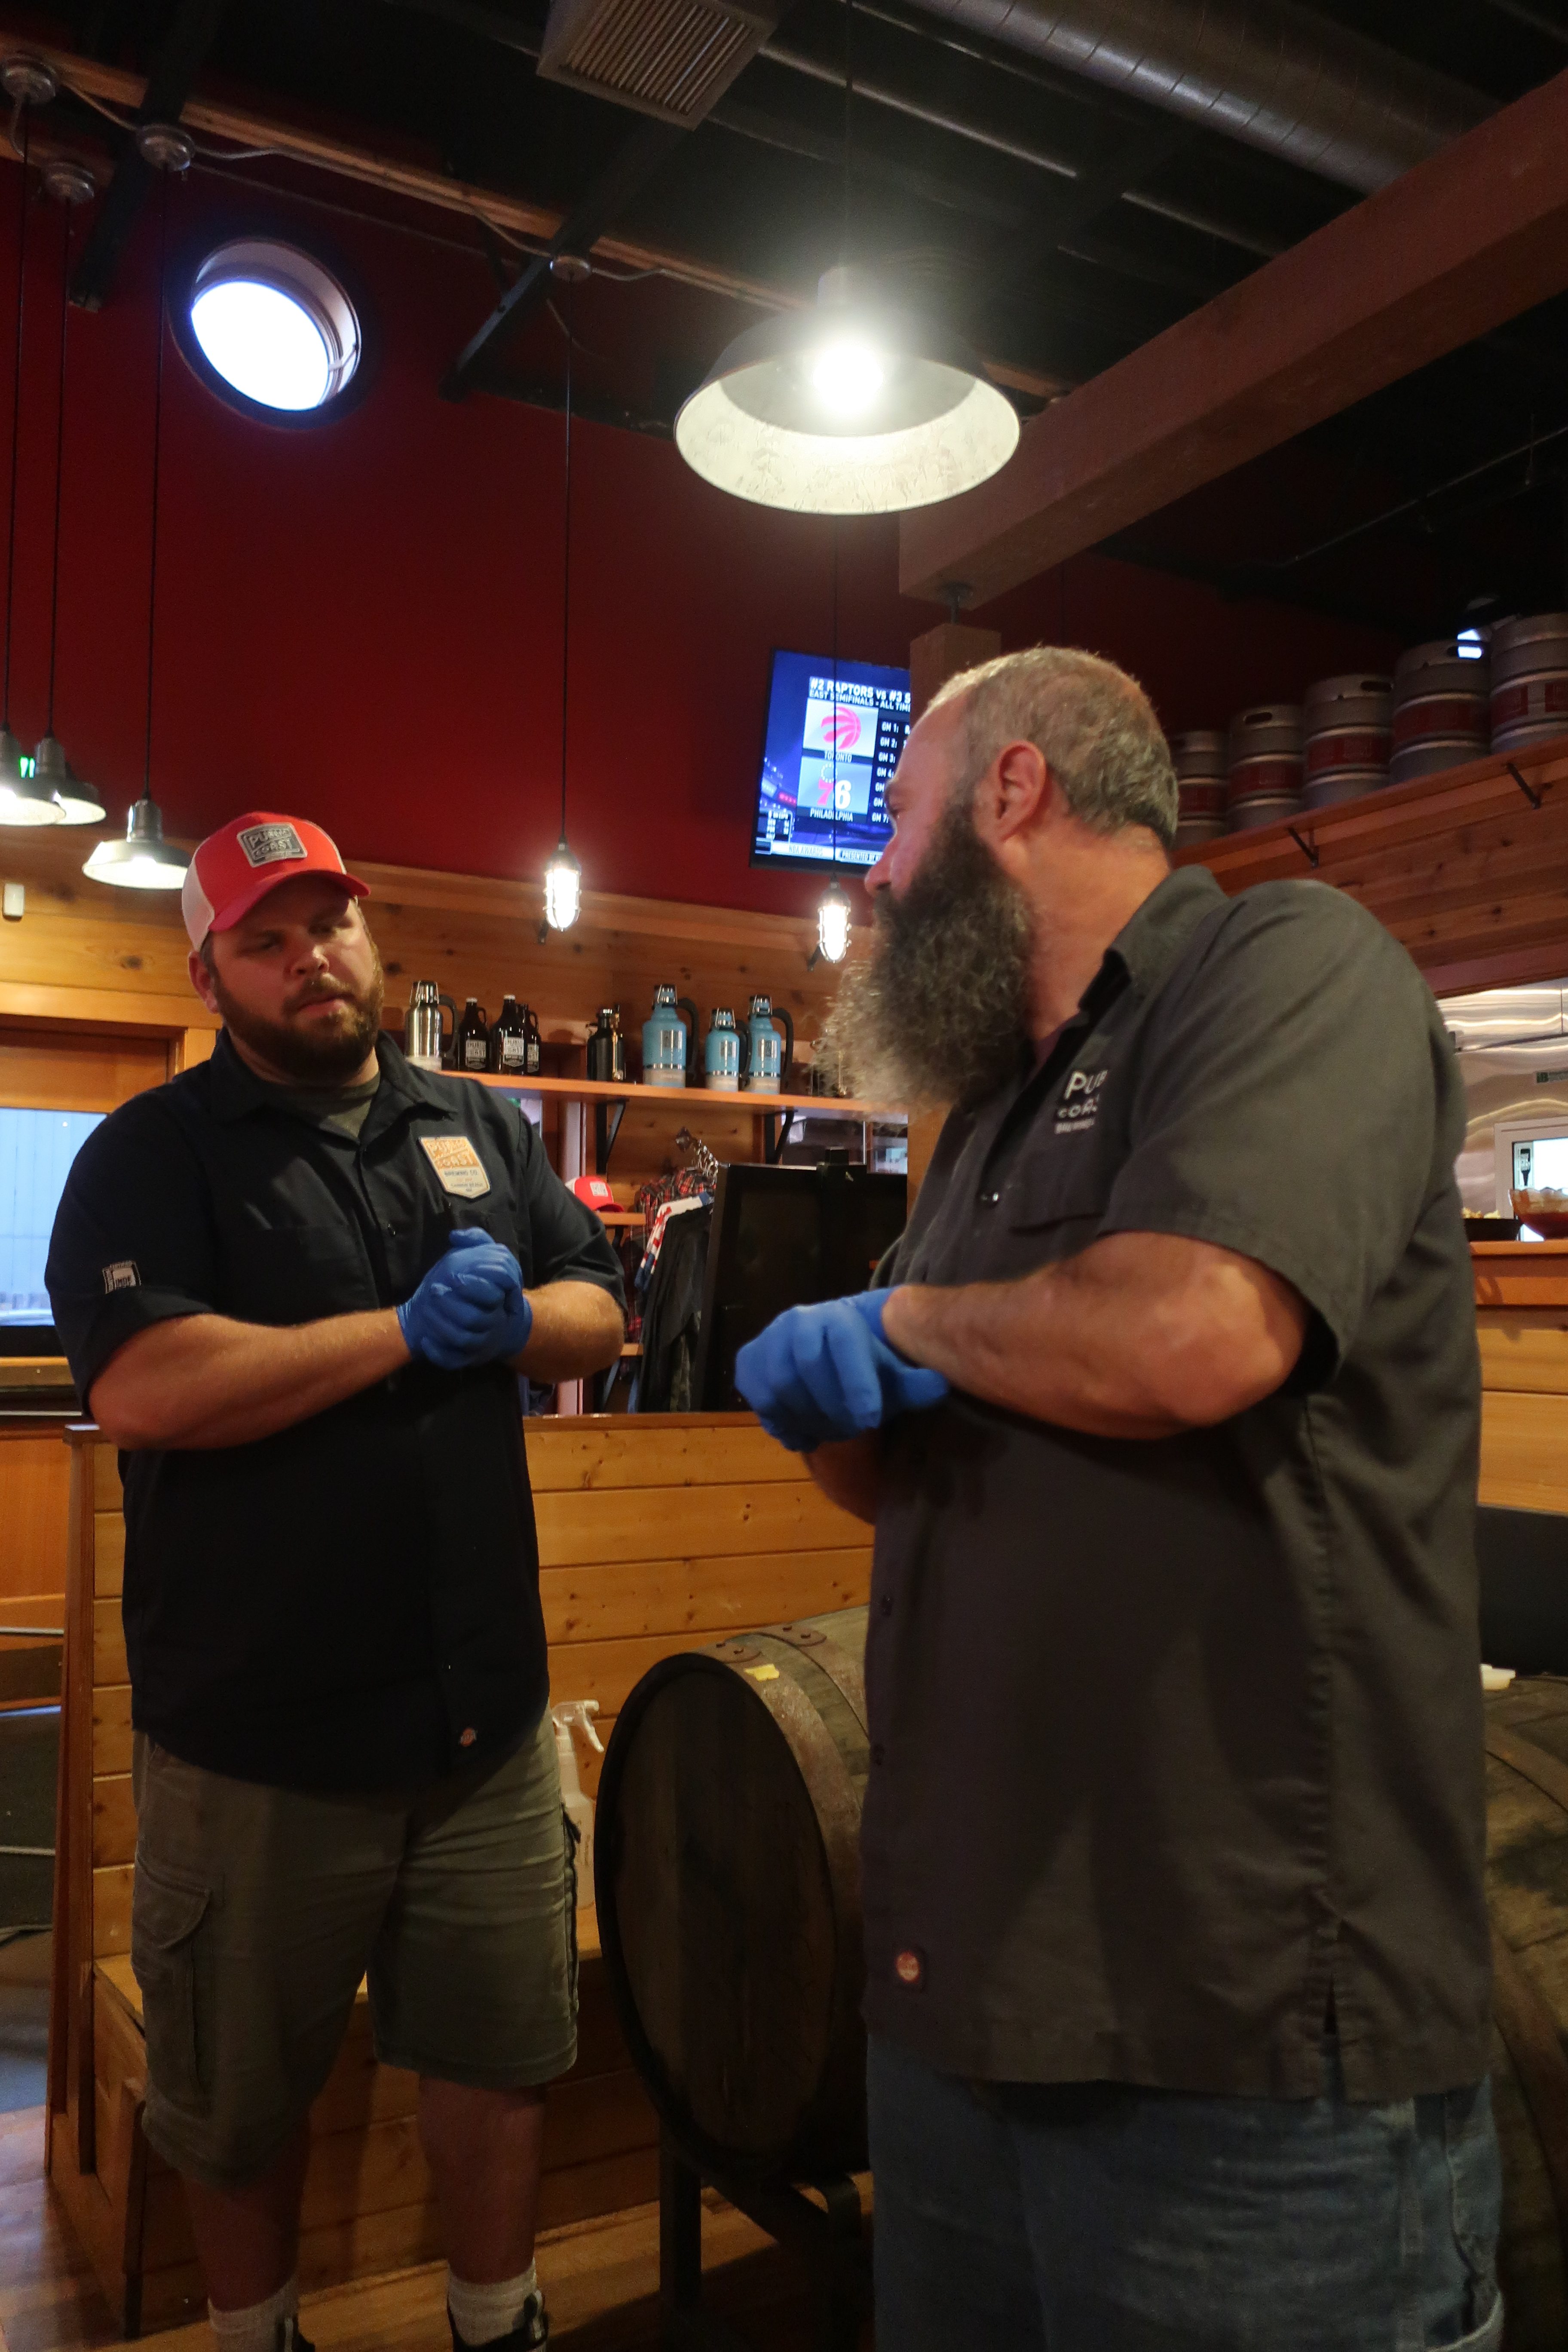 Will Leroux (right) and Ben Christianson about to serve a barrel-aged beer directly from the spirits barrel at Public Coast Brewing.